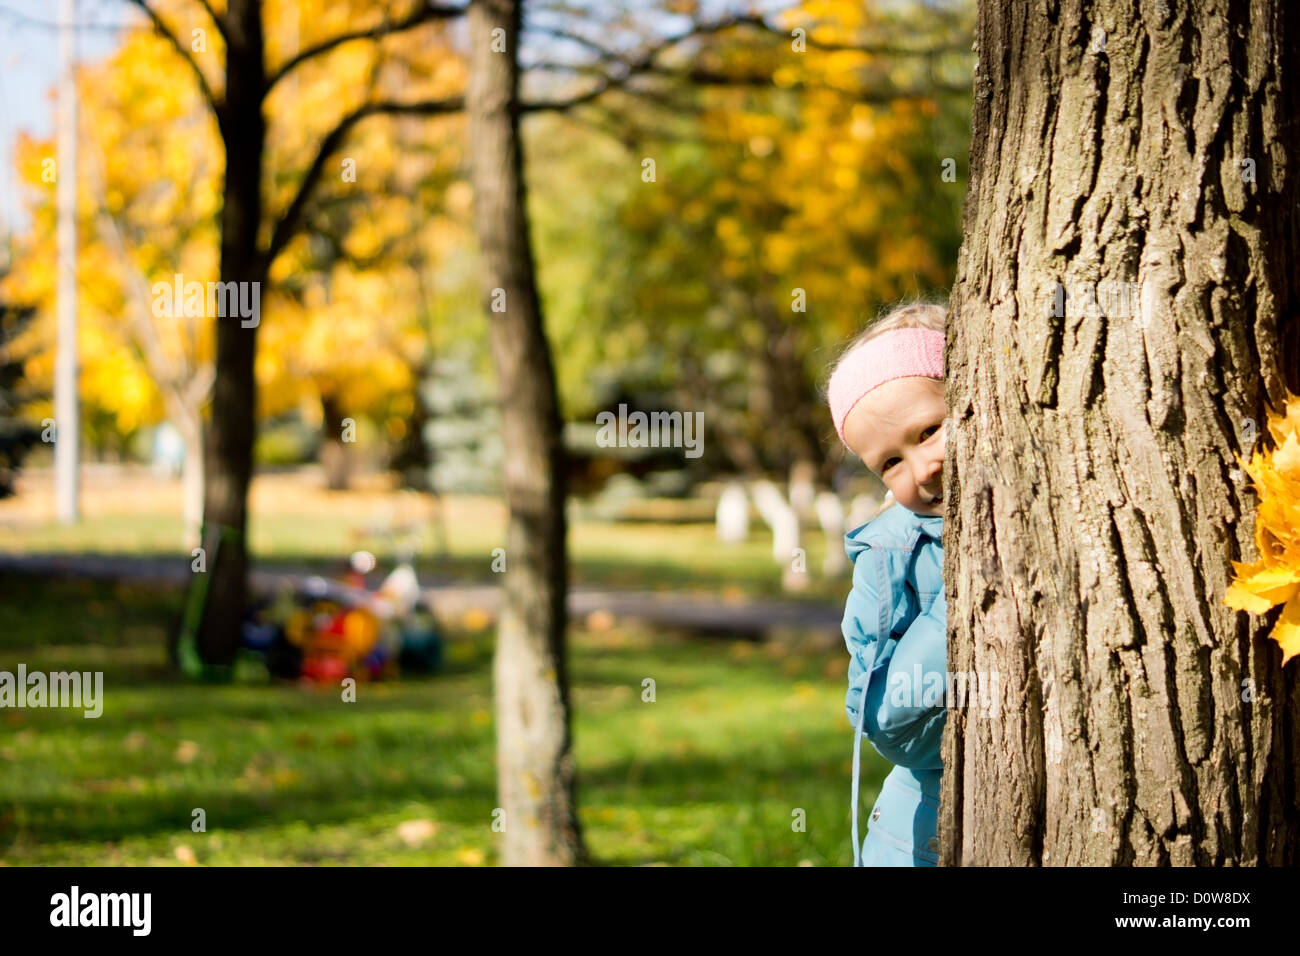 Young girl playing peek a boo hiding behimd the trunk of tree in an autumn park and peering out cheekily from the side Stock Photo